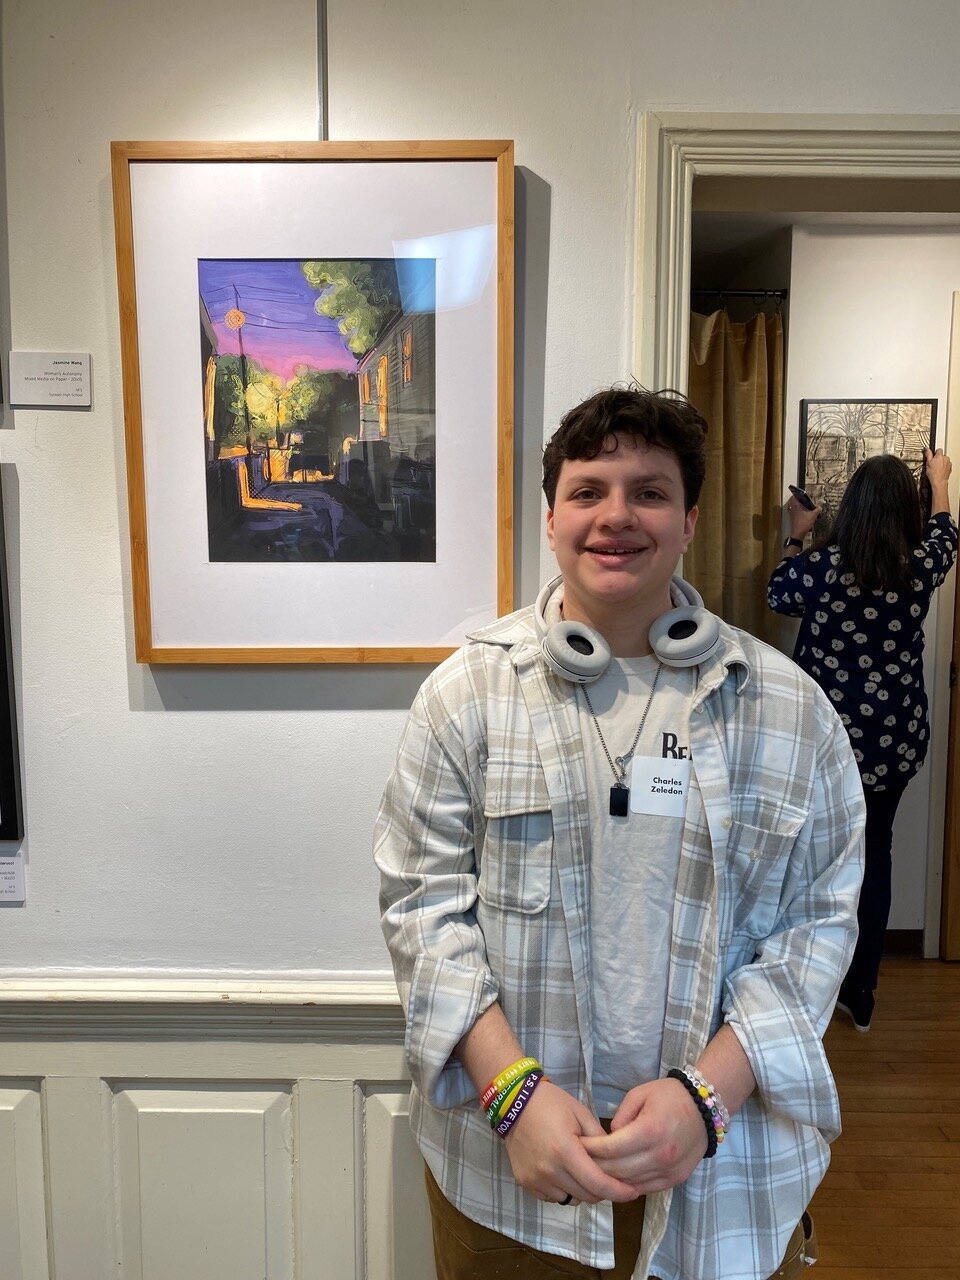 Charles Zeledon’s depiction of the street he grew up on was chosen as one of 75 works of art that were displayed at the Art Guild, in Manhasset.